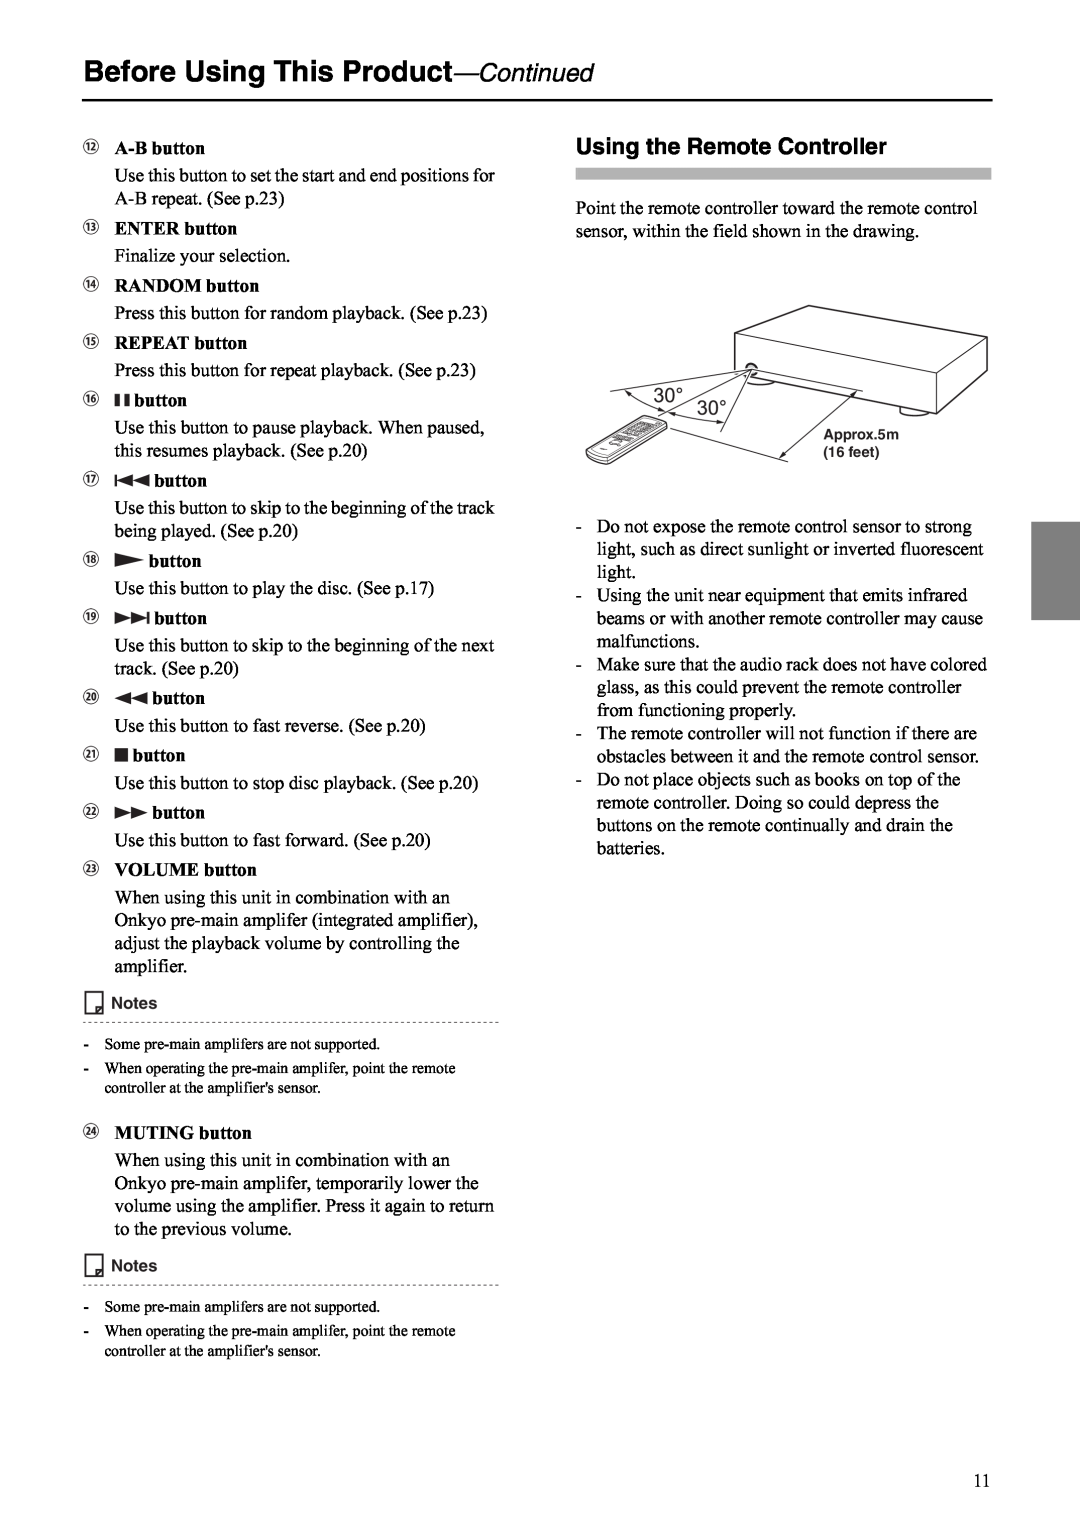 Onkyo C-S5VL instruction manual Using the Remote Controller, Before Using This Product-Continued, Approx.5m 16 feet 